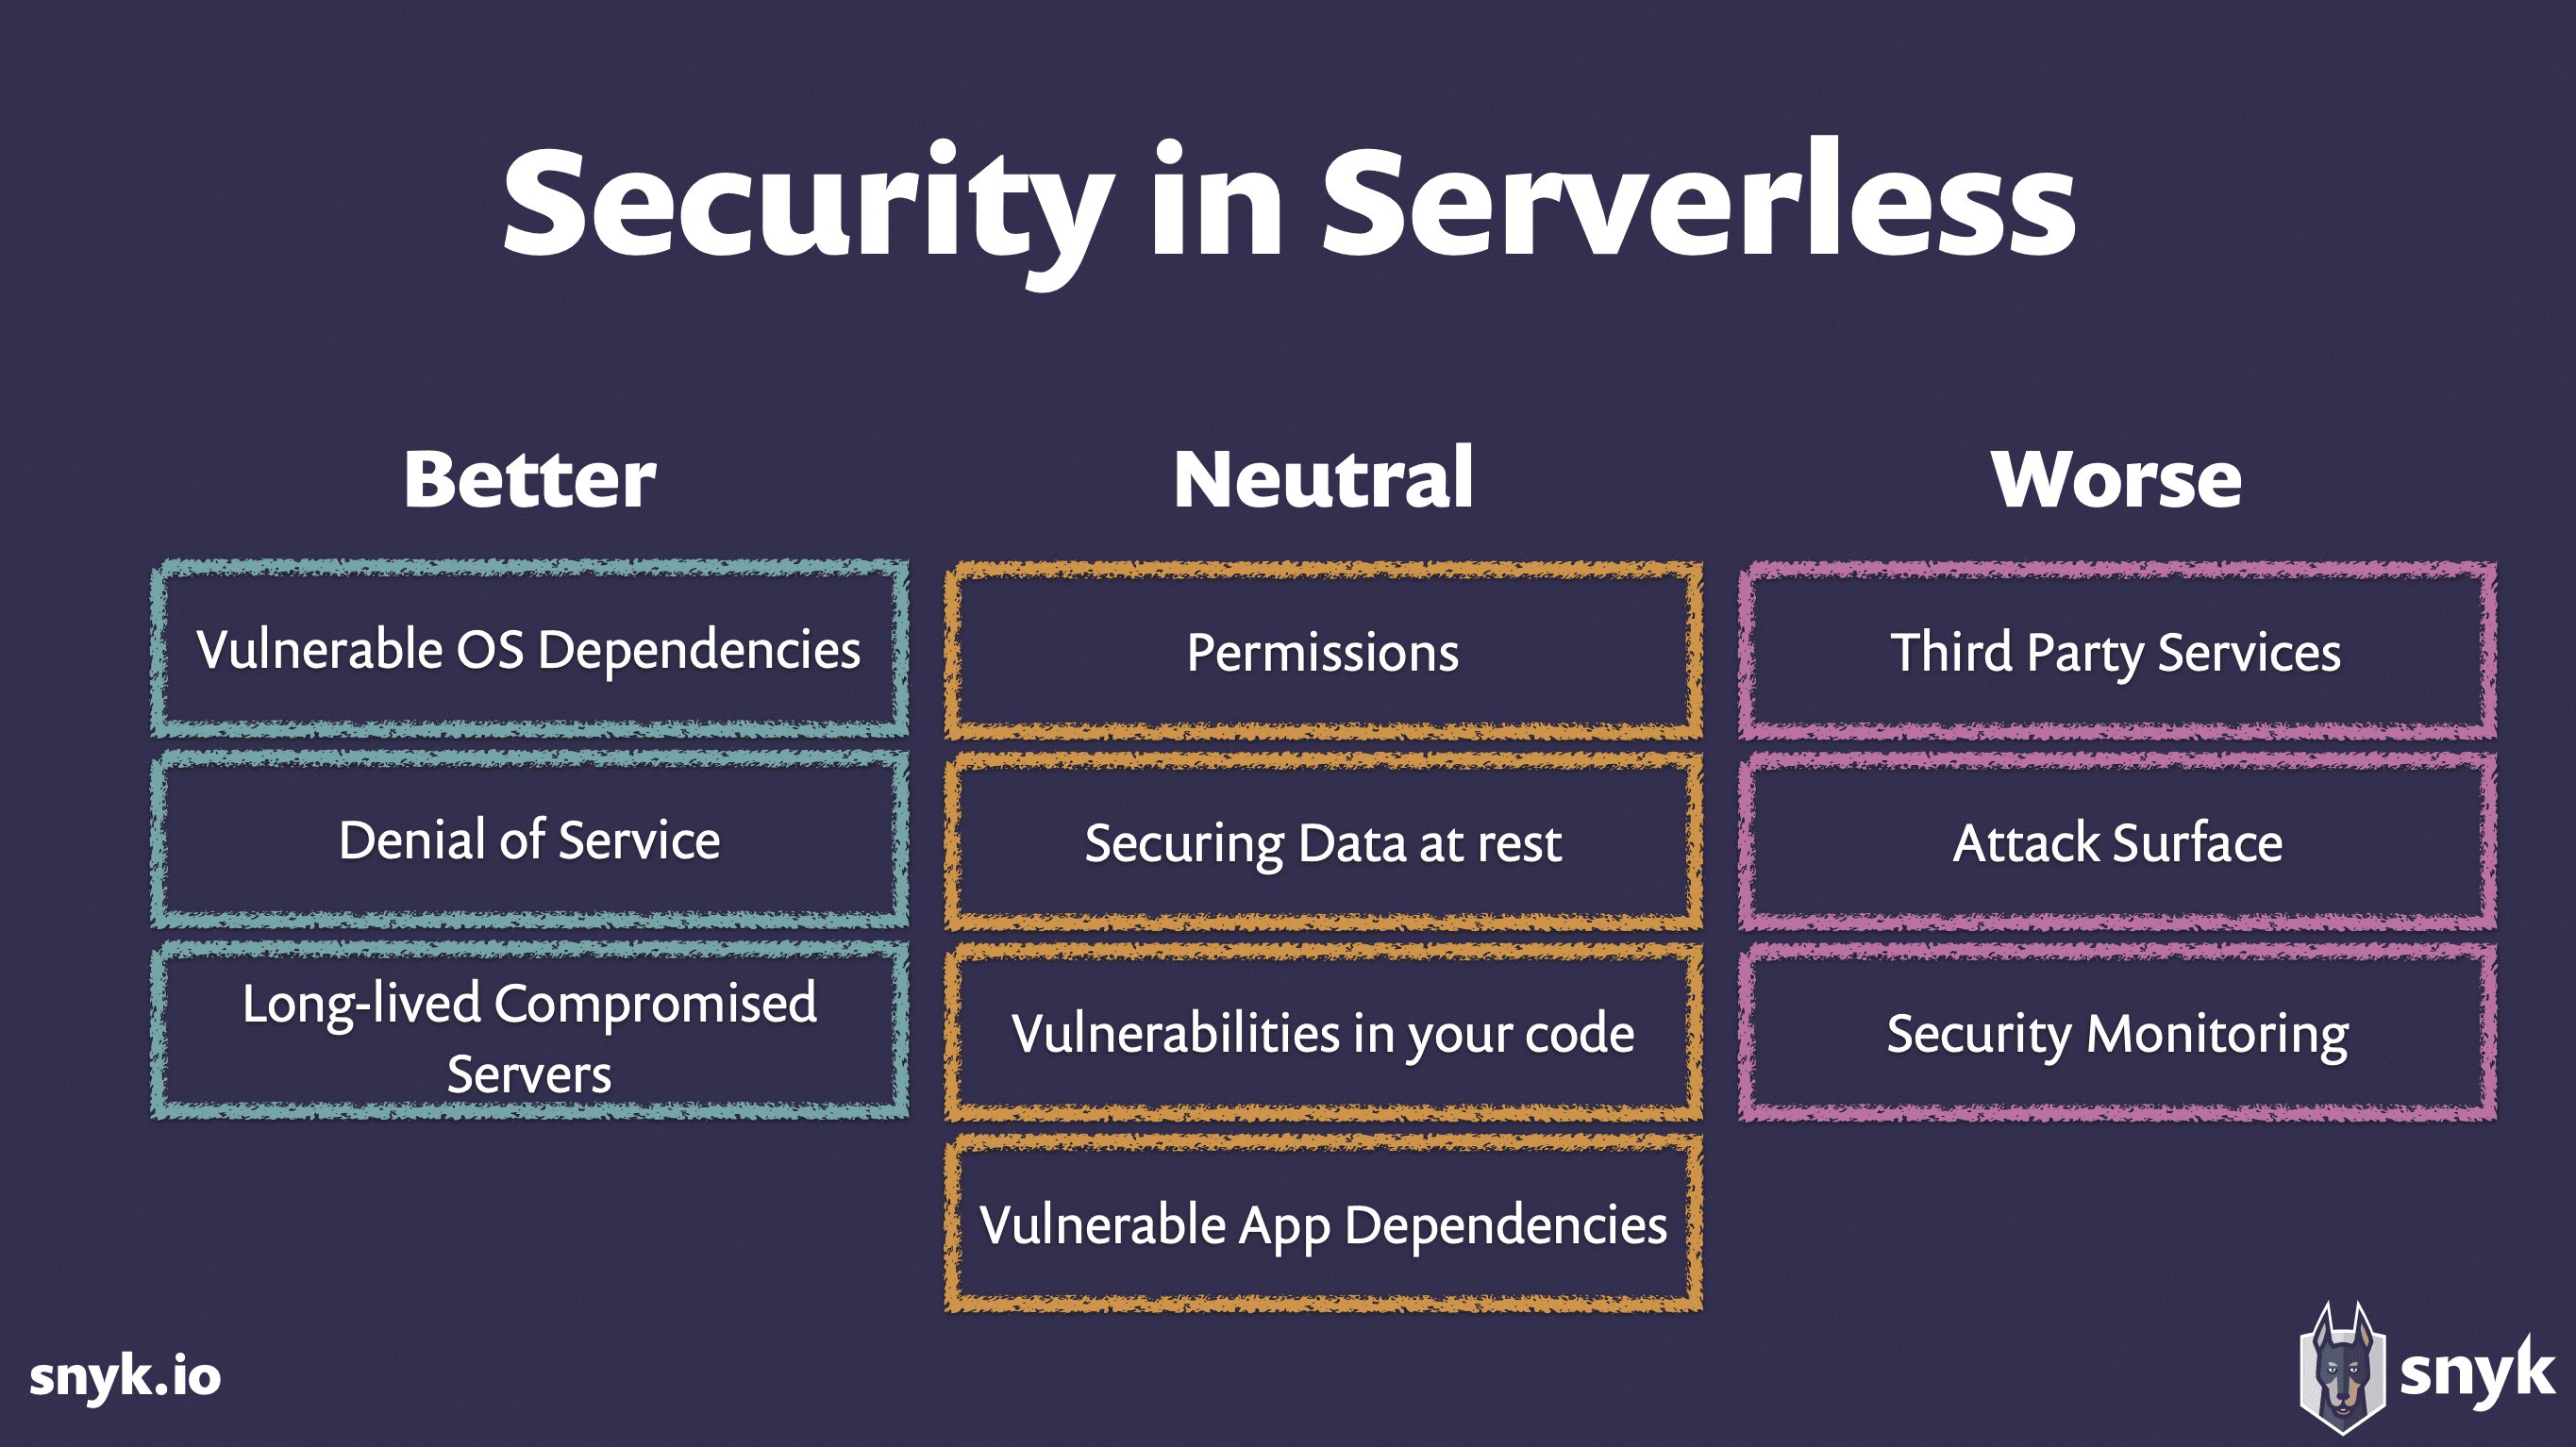 Security Challenges in Serverless Architectures: Web Applications